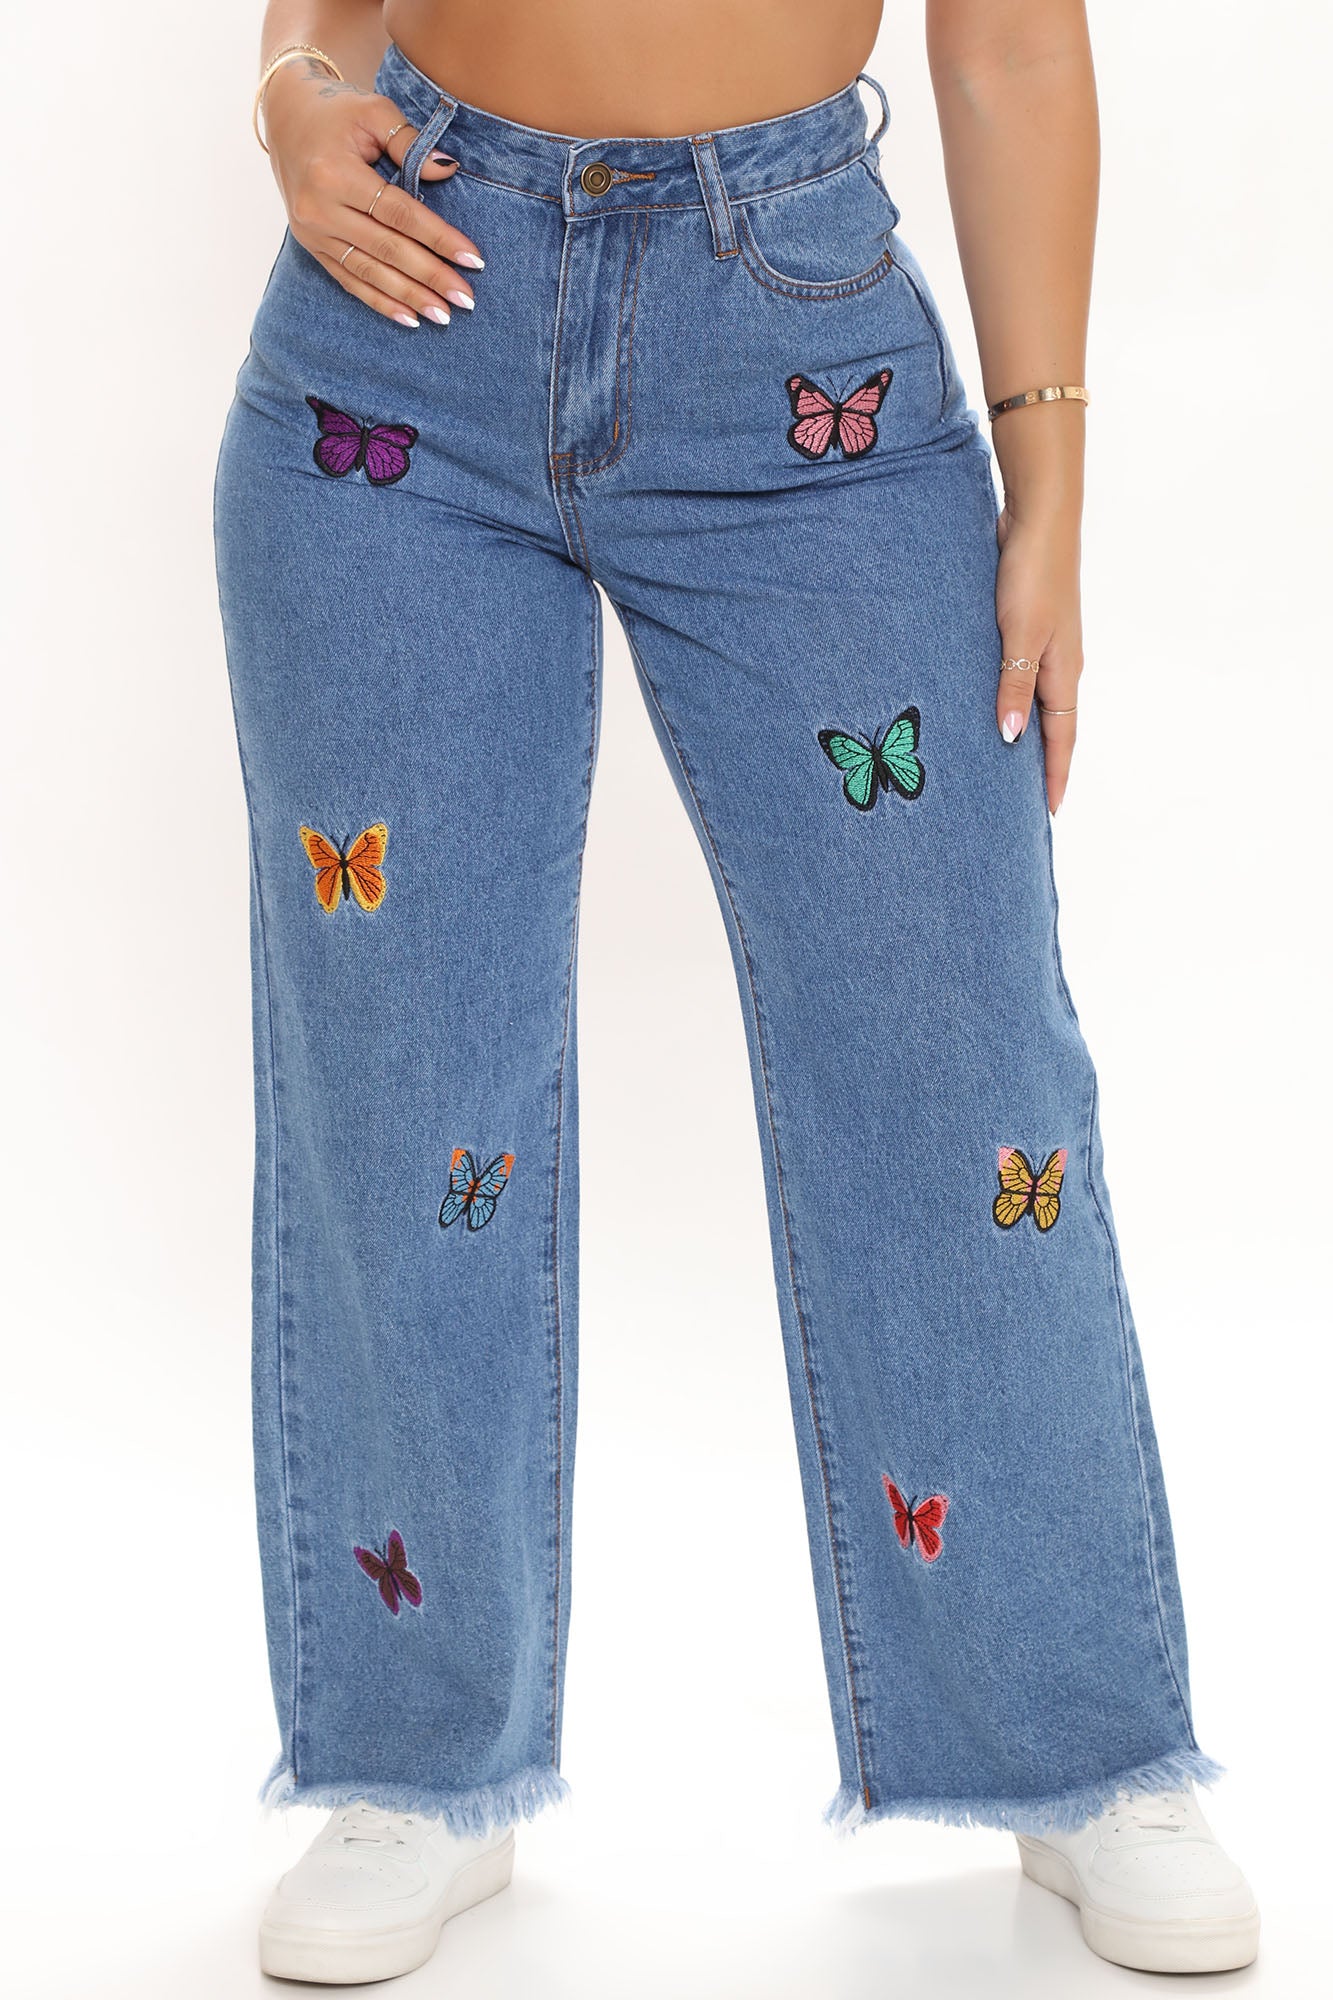 On Butterfly Wings Straight Leg Jeans - Medium Blue Wash | Fashion